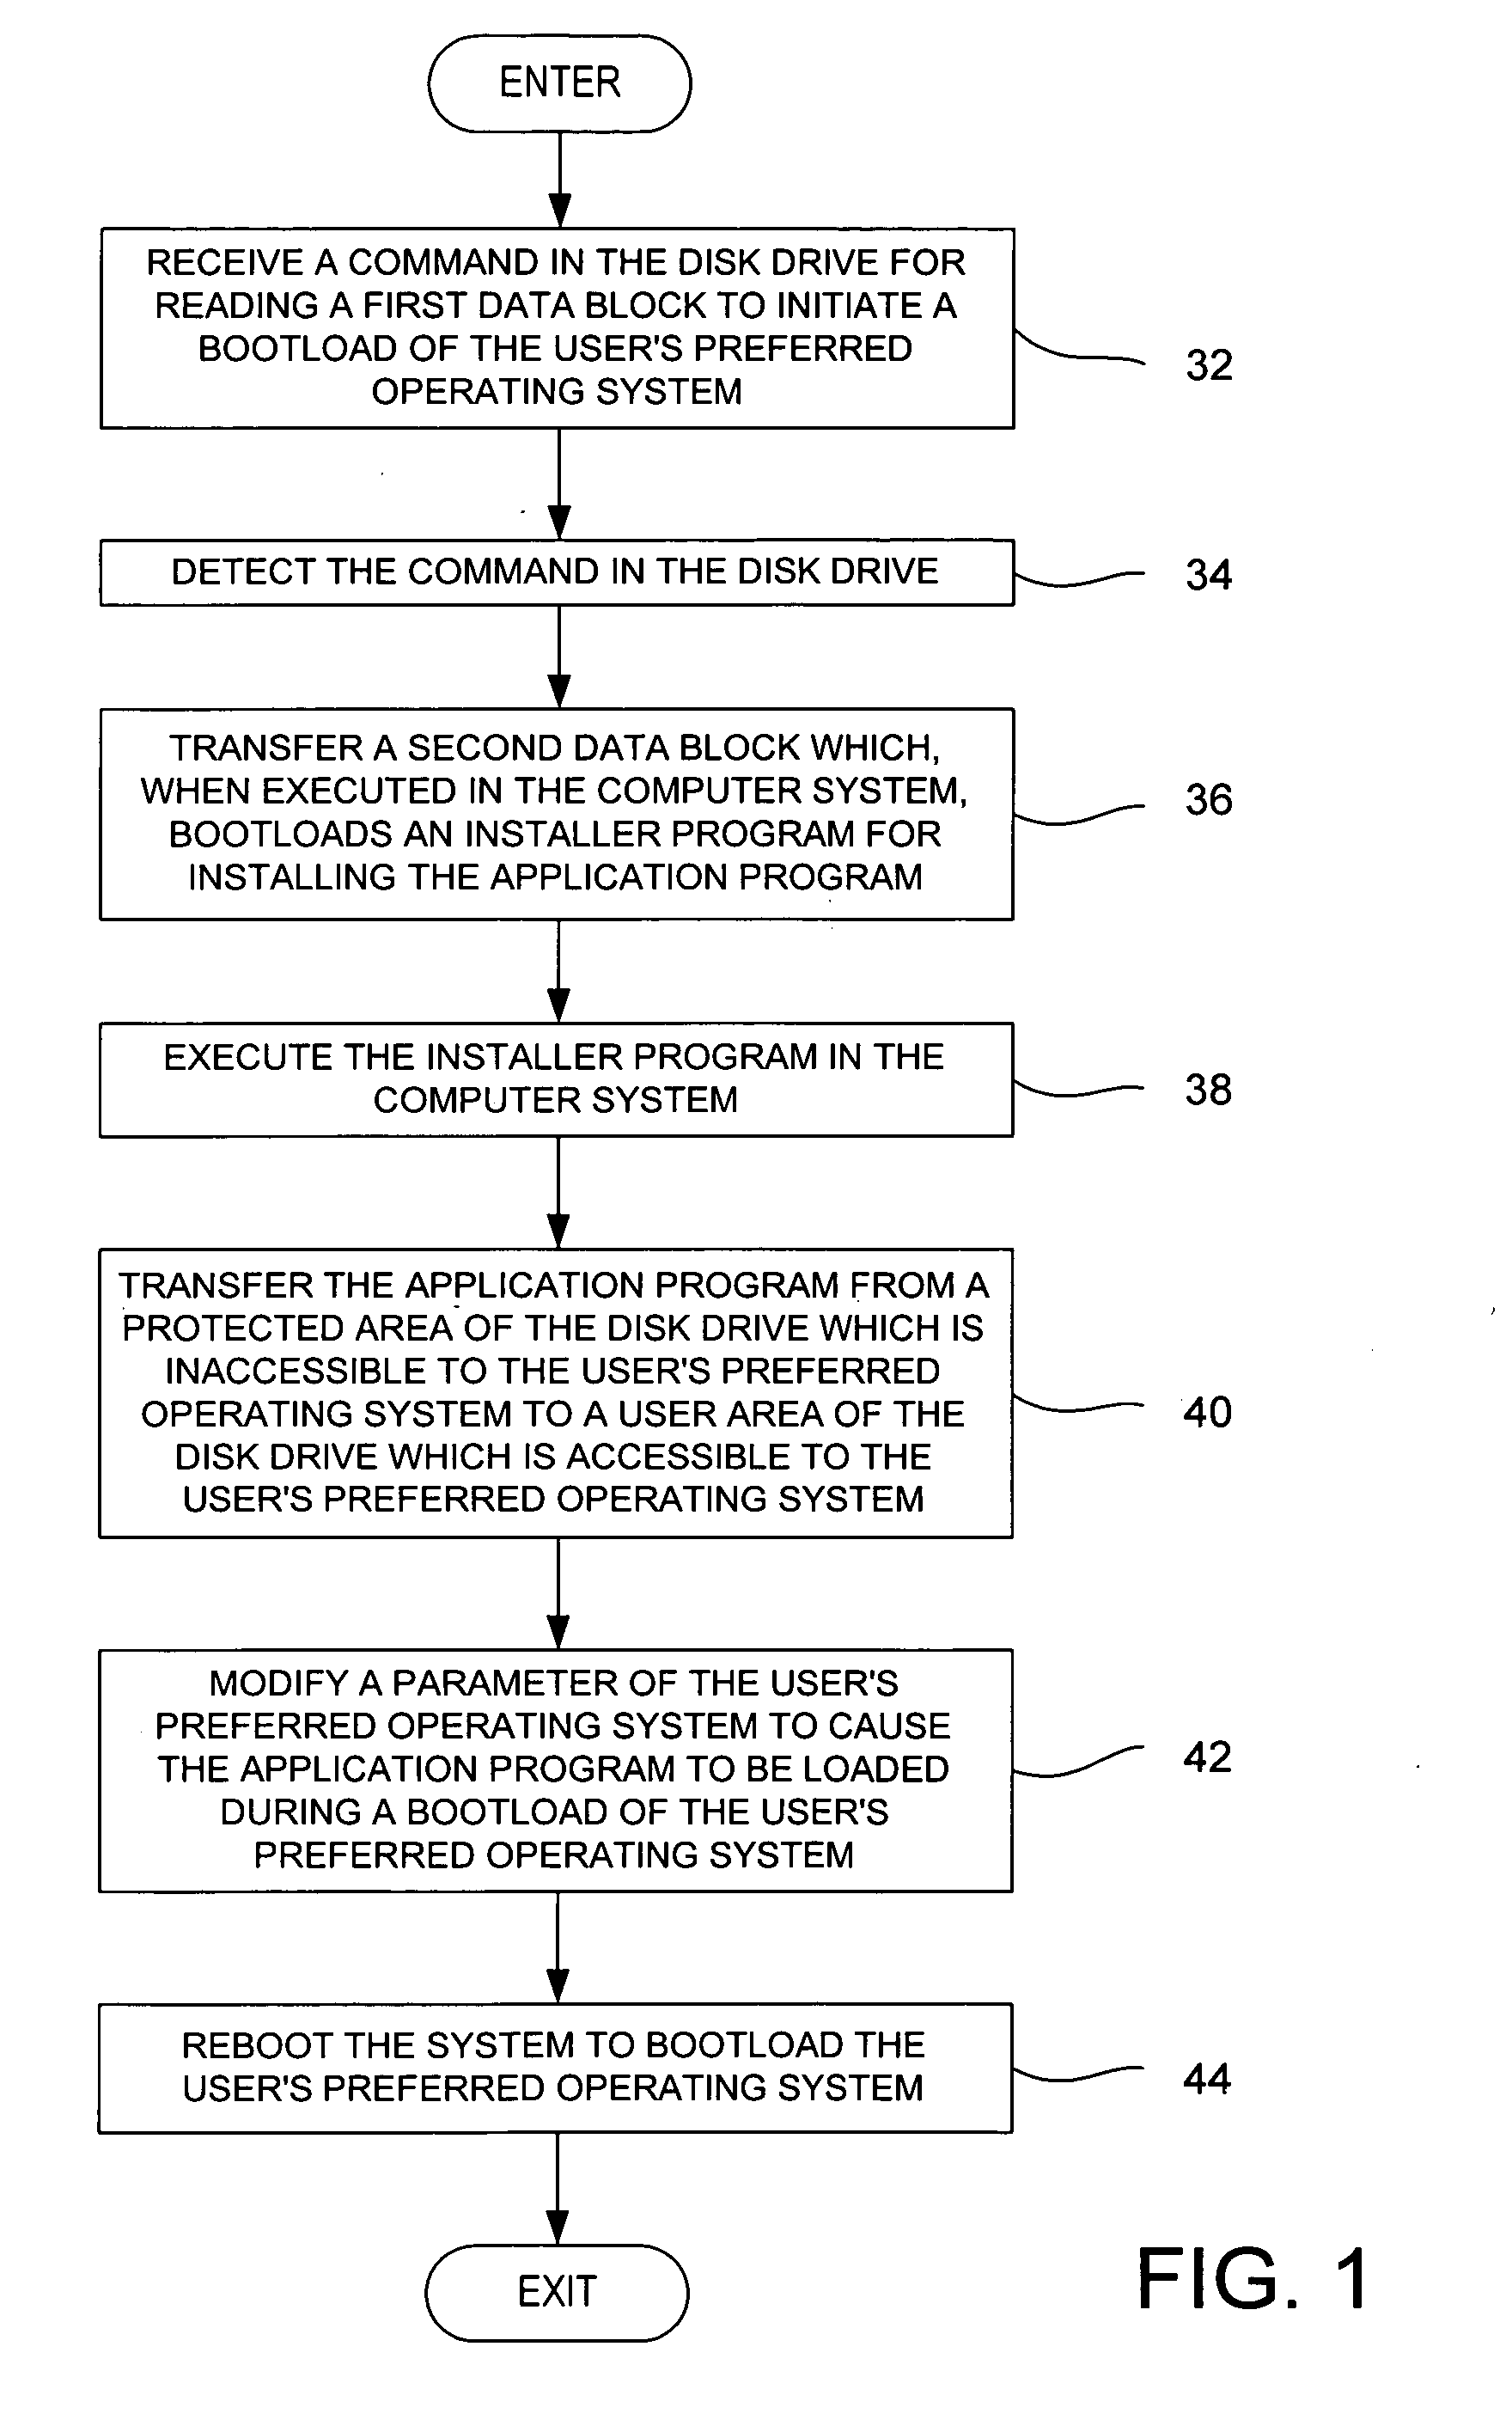 Method for installing an application program, to be executed during each bootload of a computer system for presenting a user with content options prior to conventional system startup presentation, without requiring a user's participation to install the program